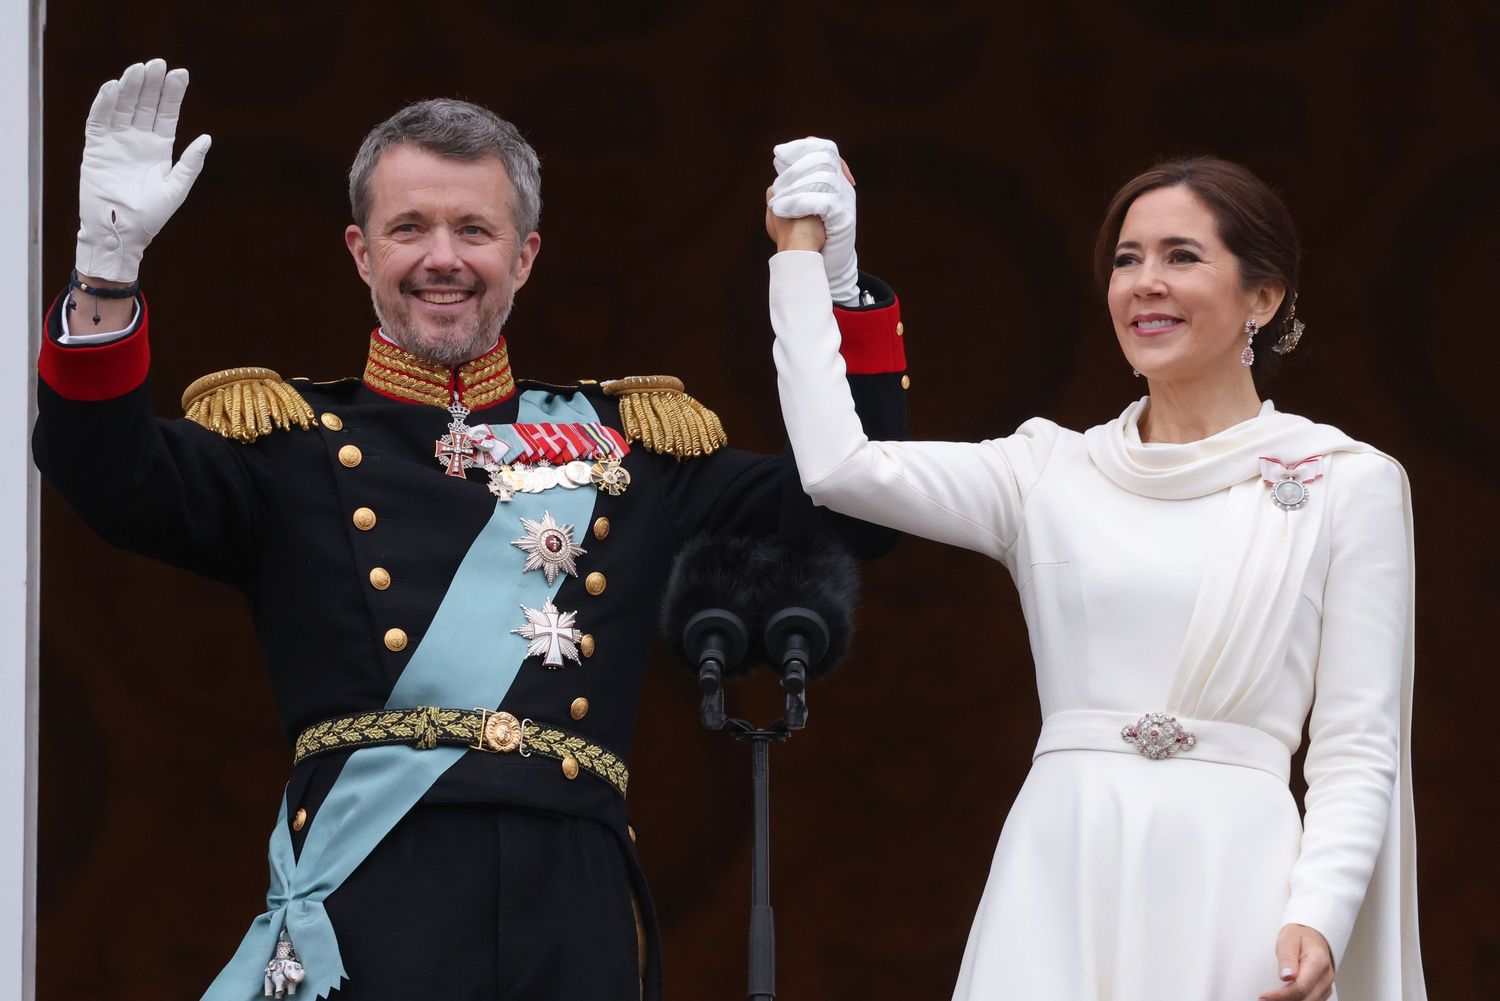 This is what the new King and Queen of Denmark wore to their coronation ...